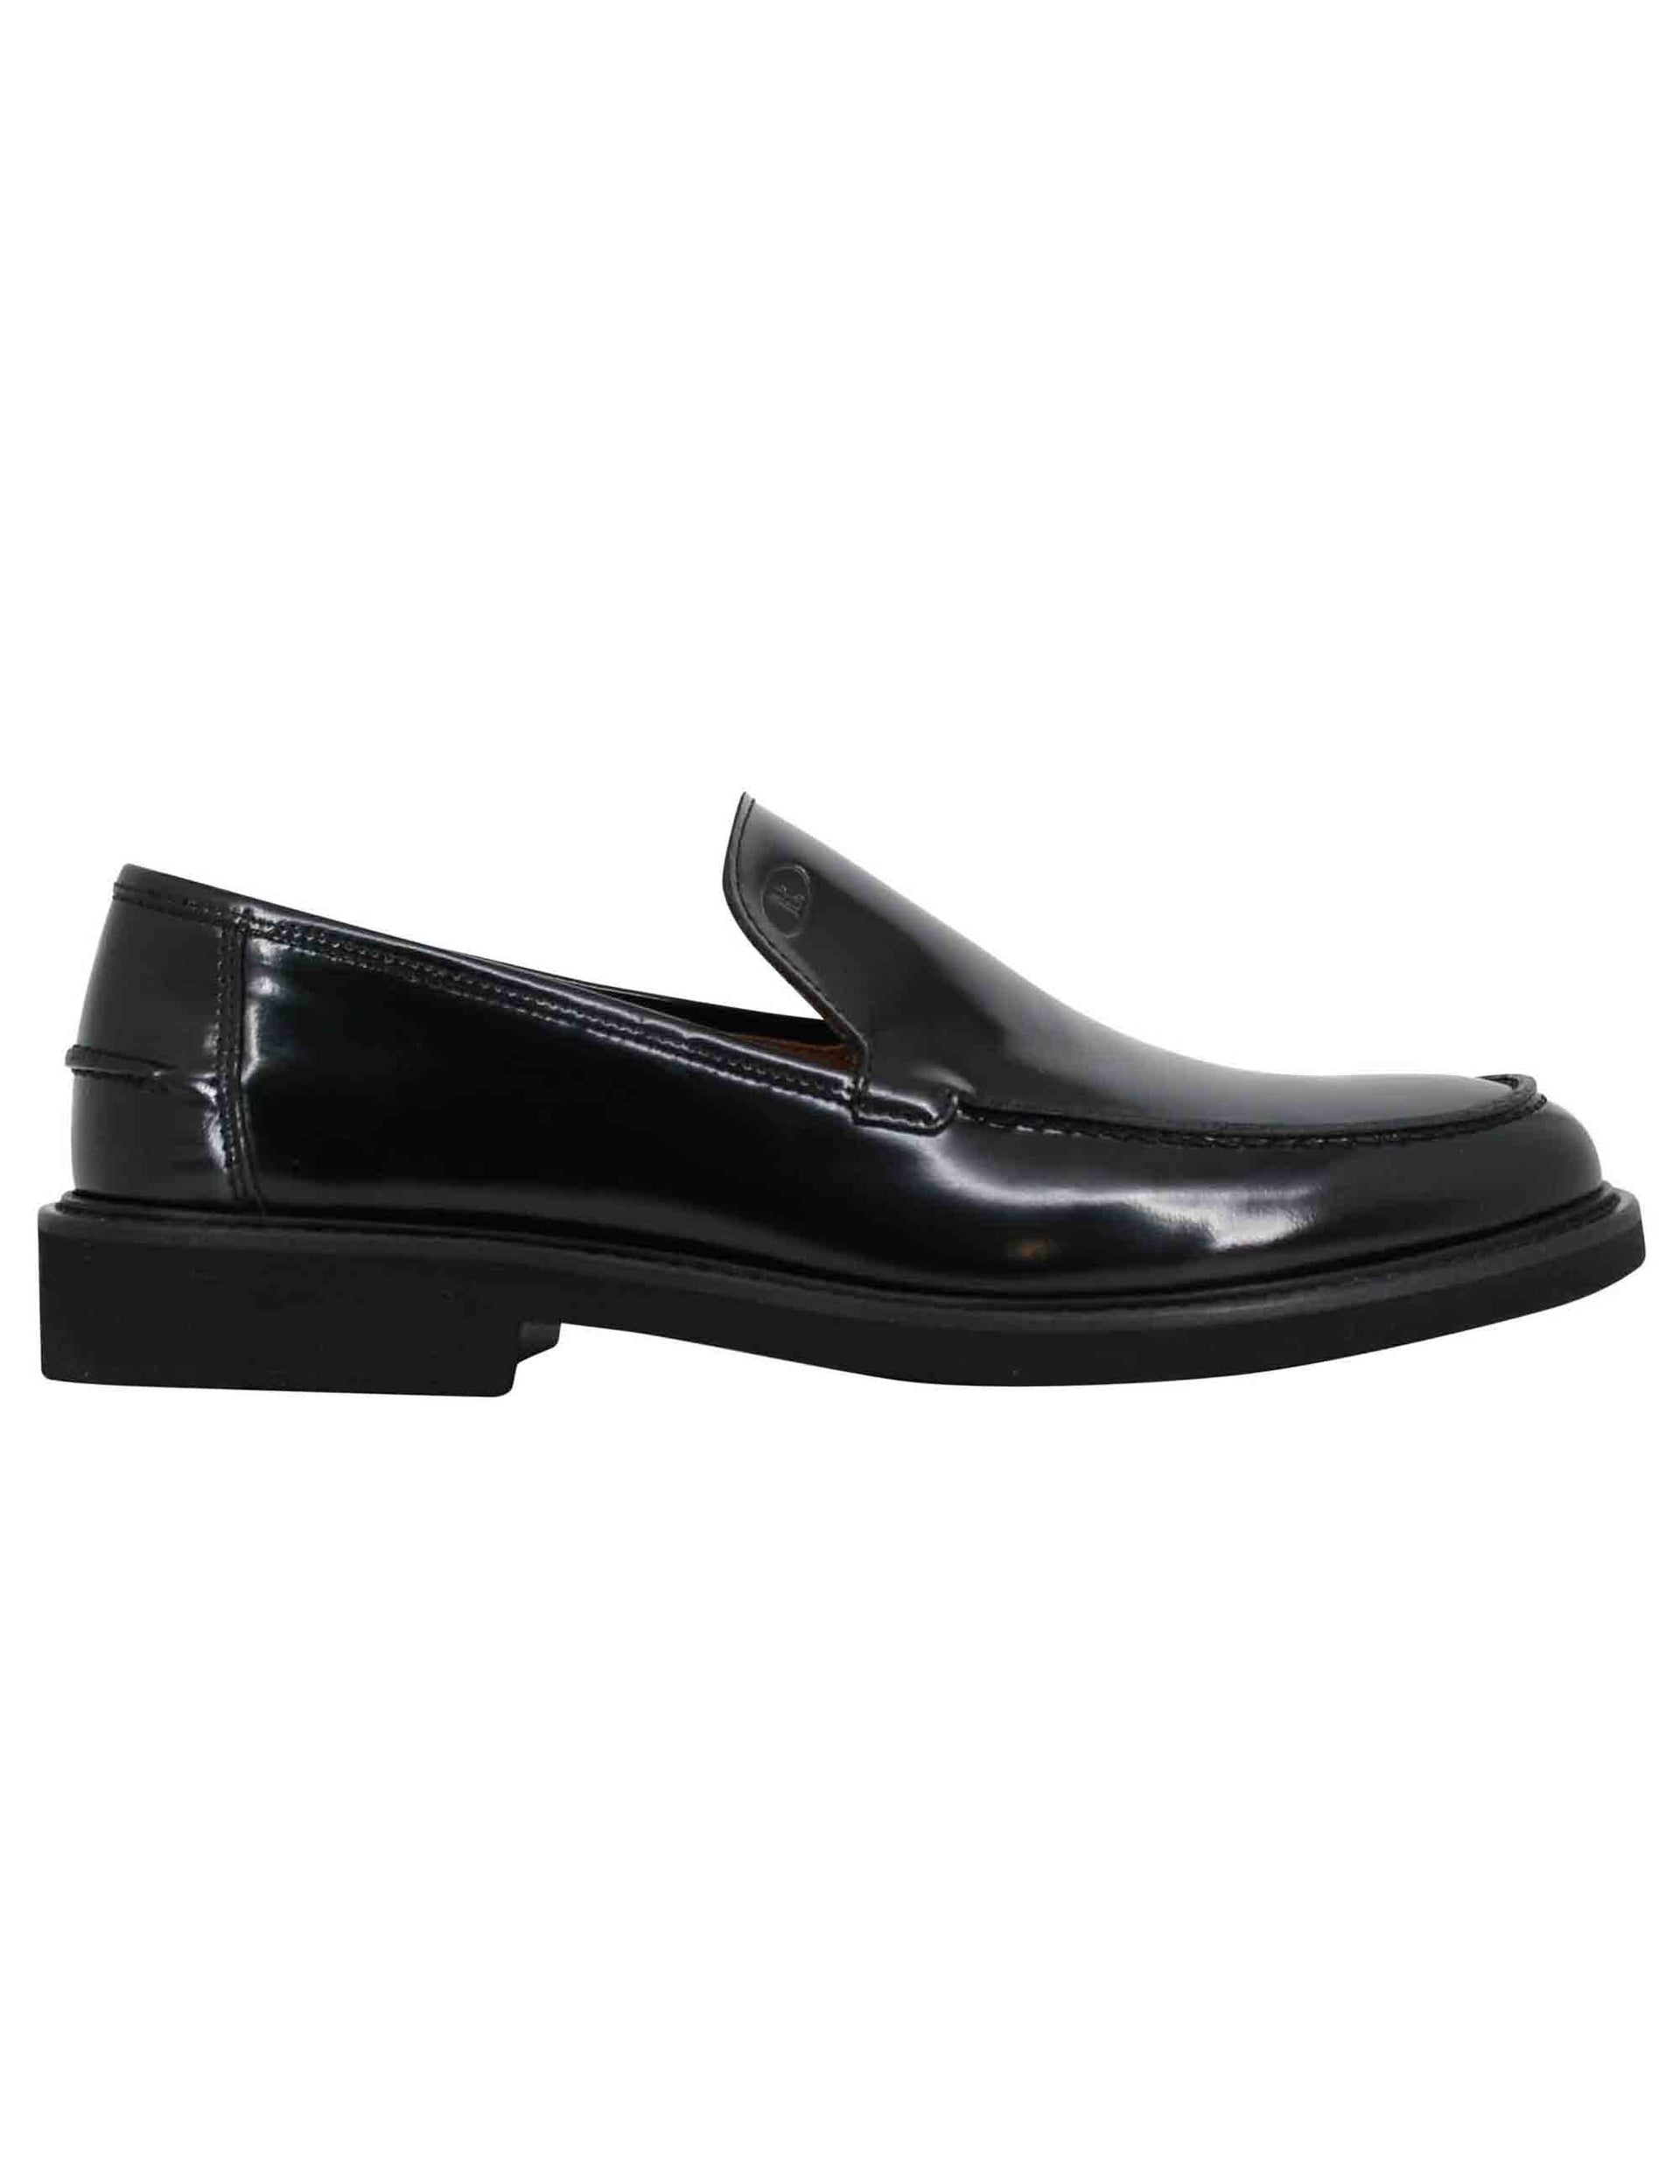 Men's moccasins in shiny black leather with ultra light rubber sole